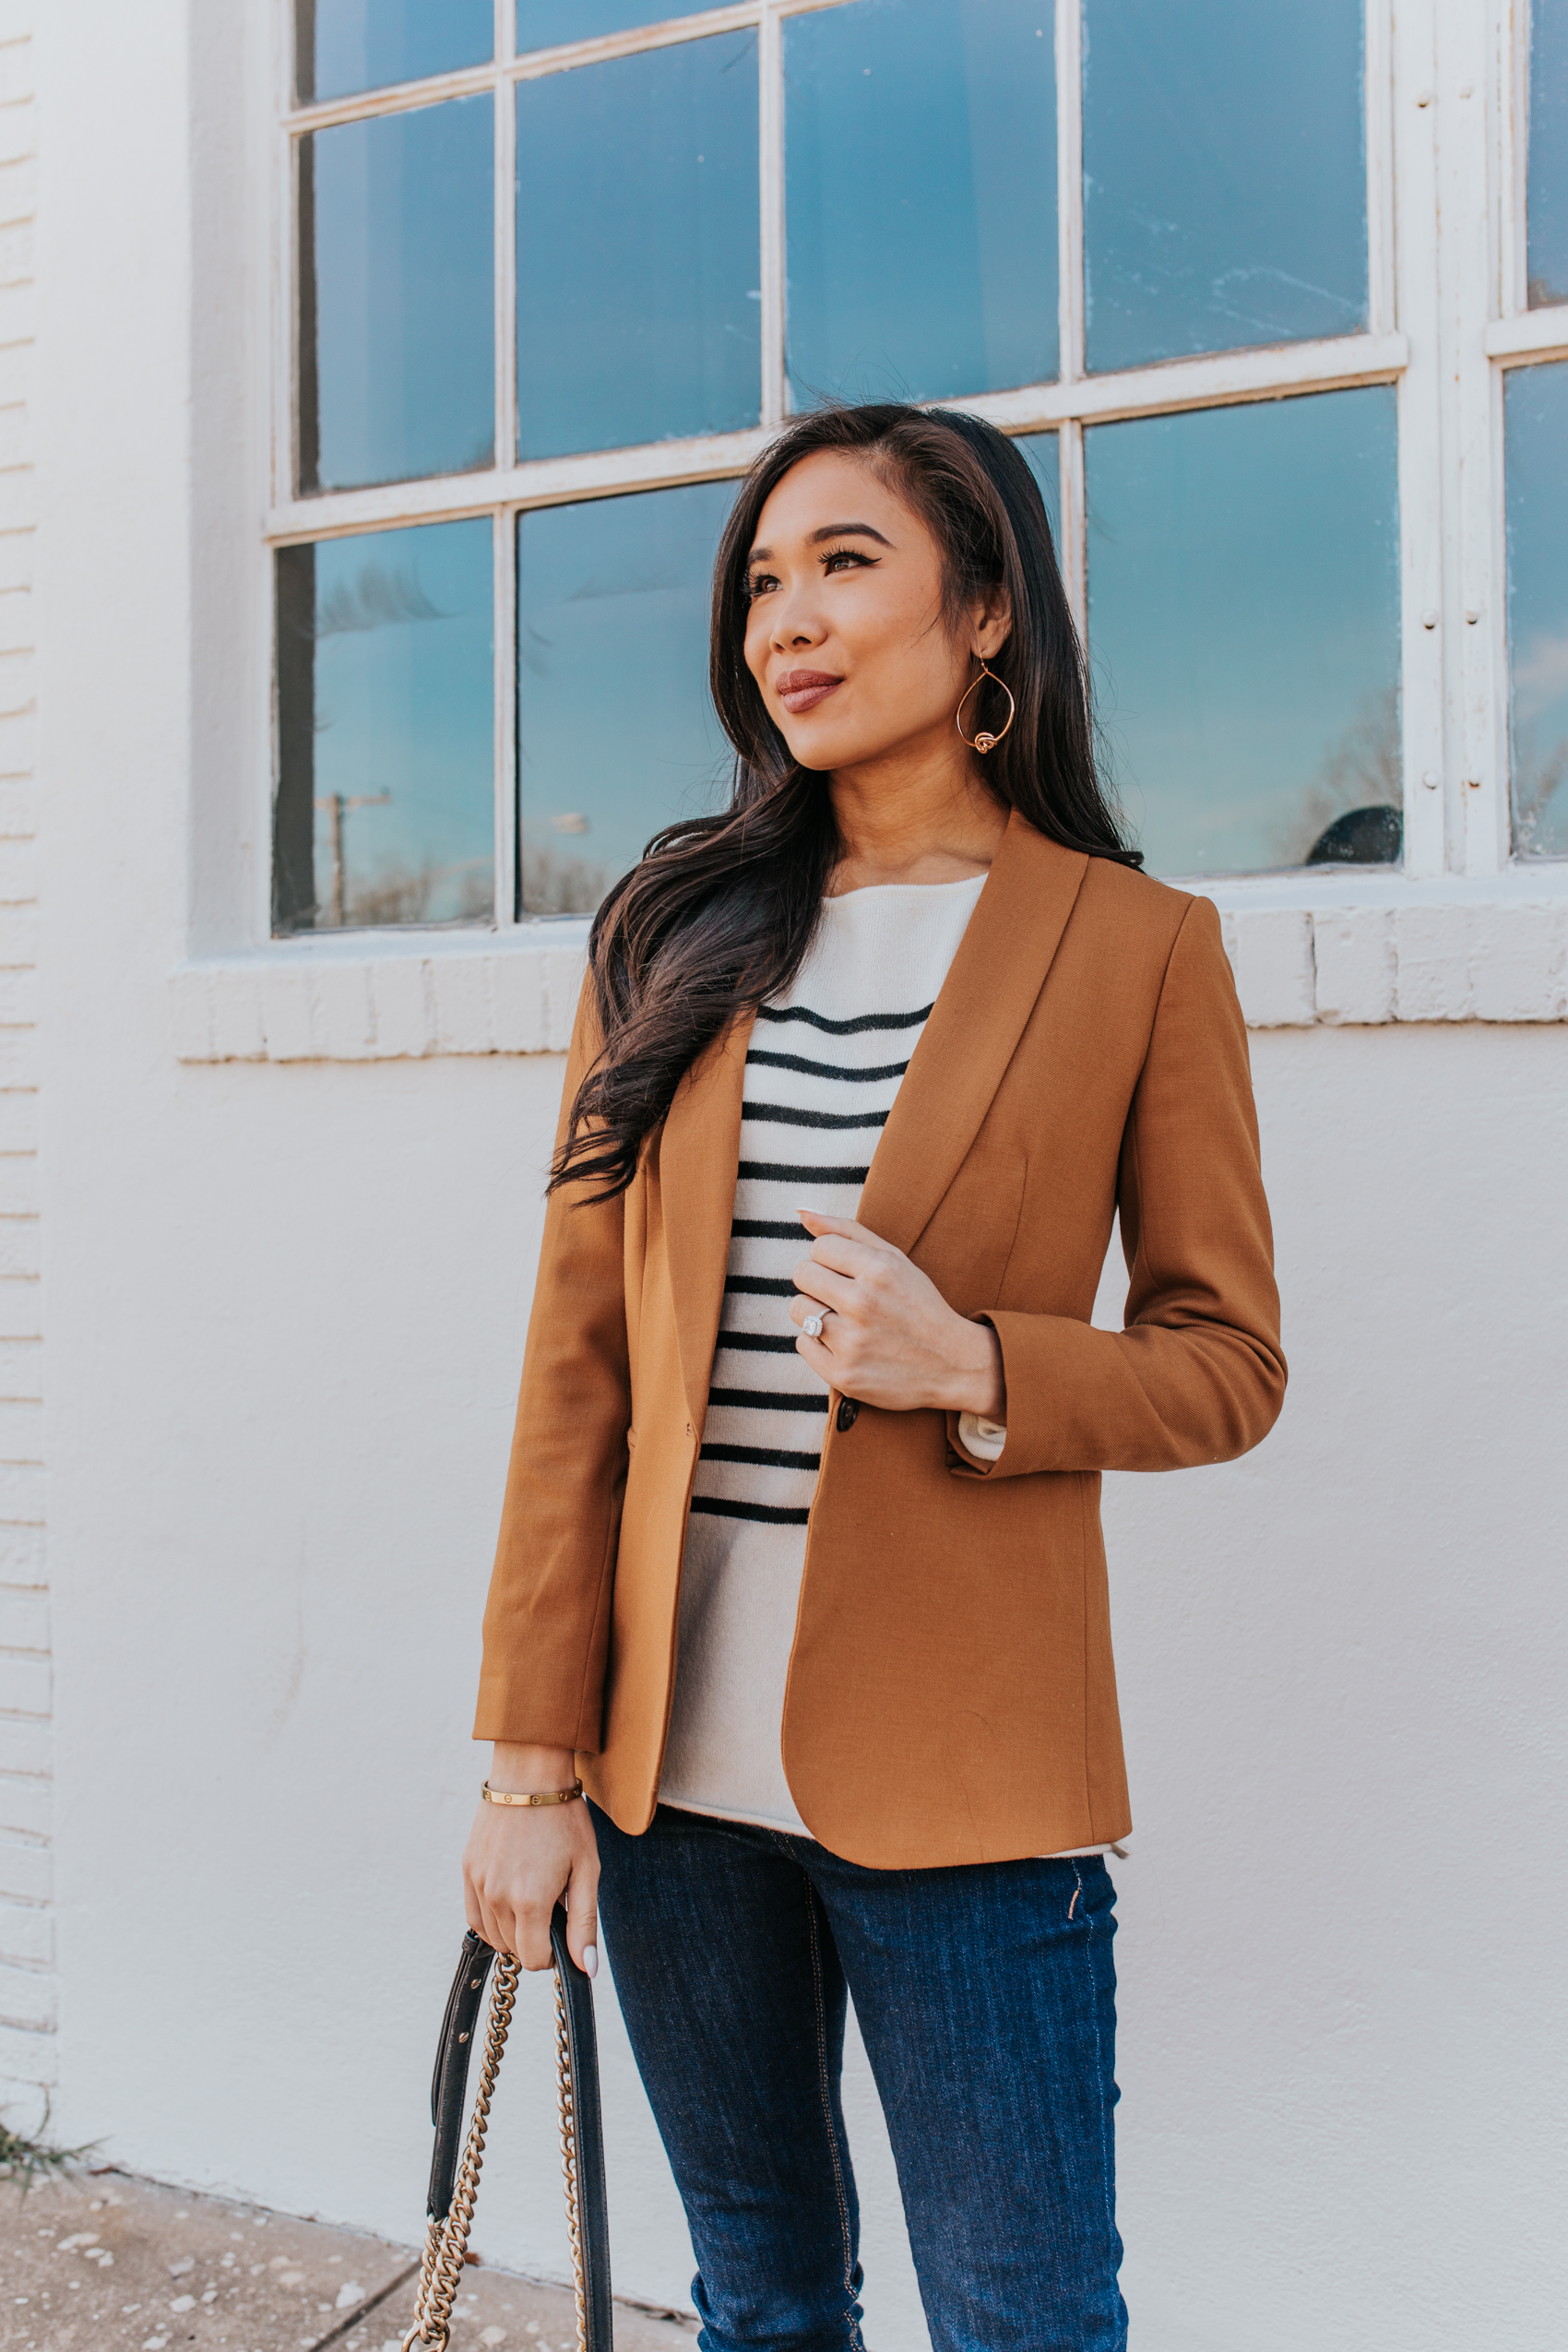 Work outfits for women by petite fashion blogger Hoang-Kim with a striped cashmere sweater wool blazer and rose gold Kendra Scott earrings